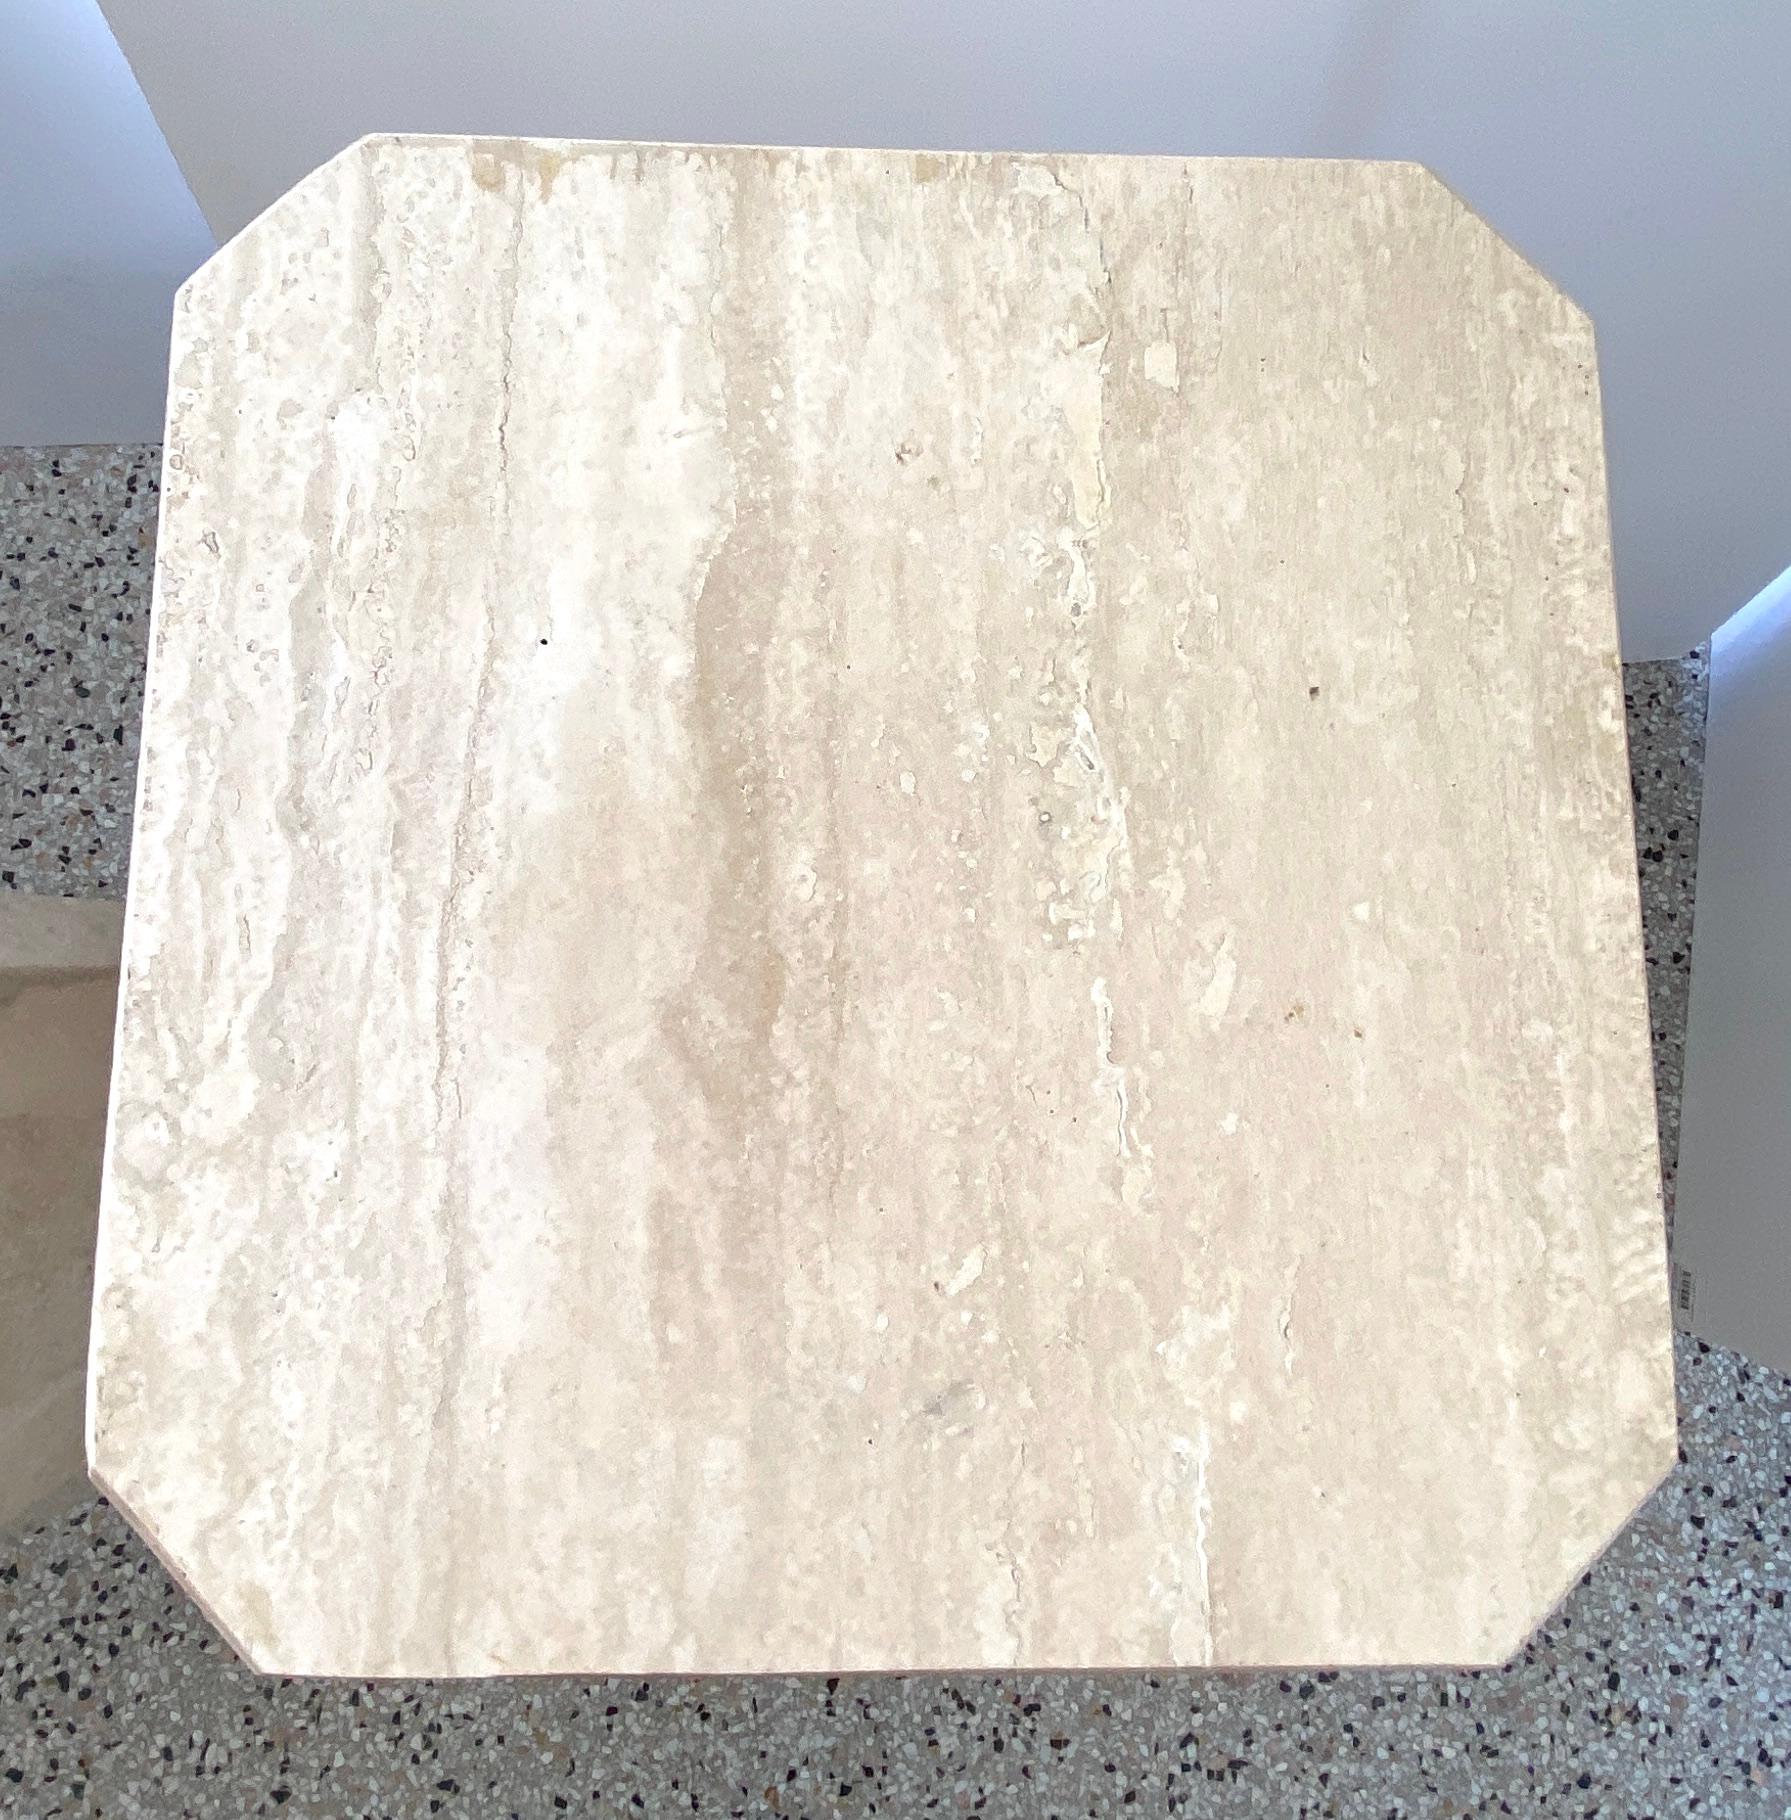 This stylish, chic and clean-lined Italian travertine pedestal will make the perfect perch for a piece of sculpture.

Note: We have a 28